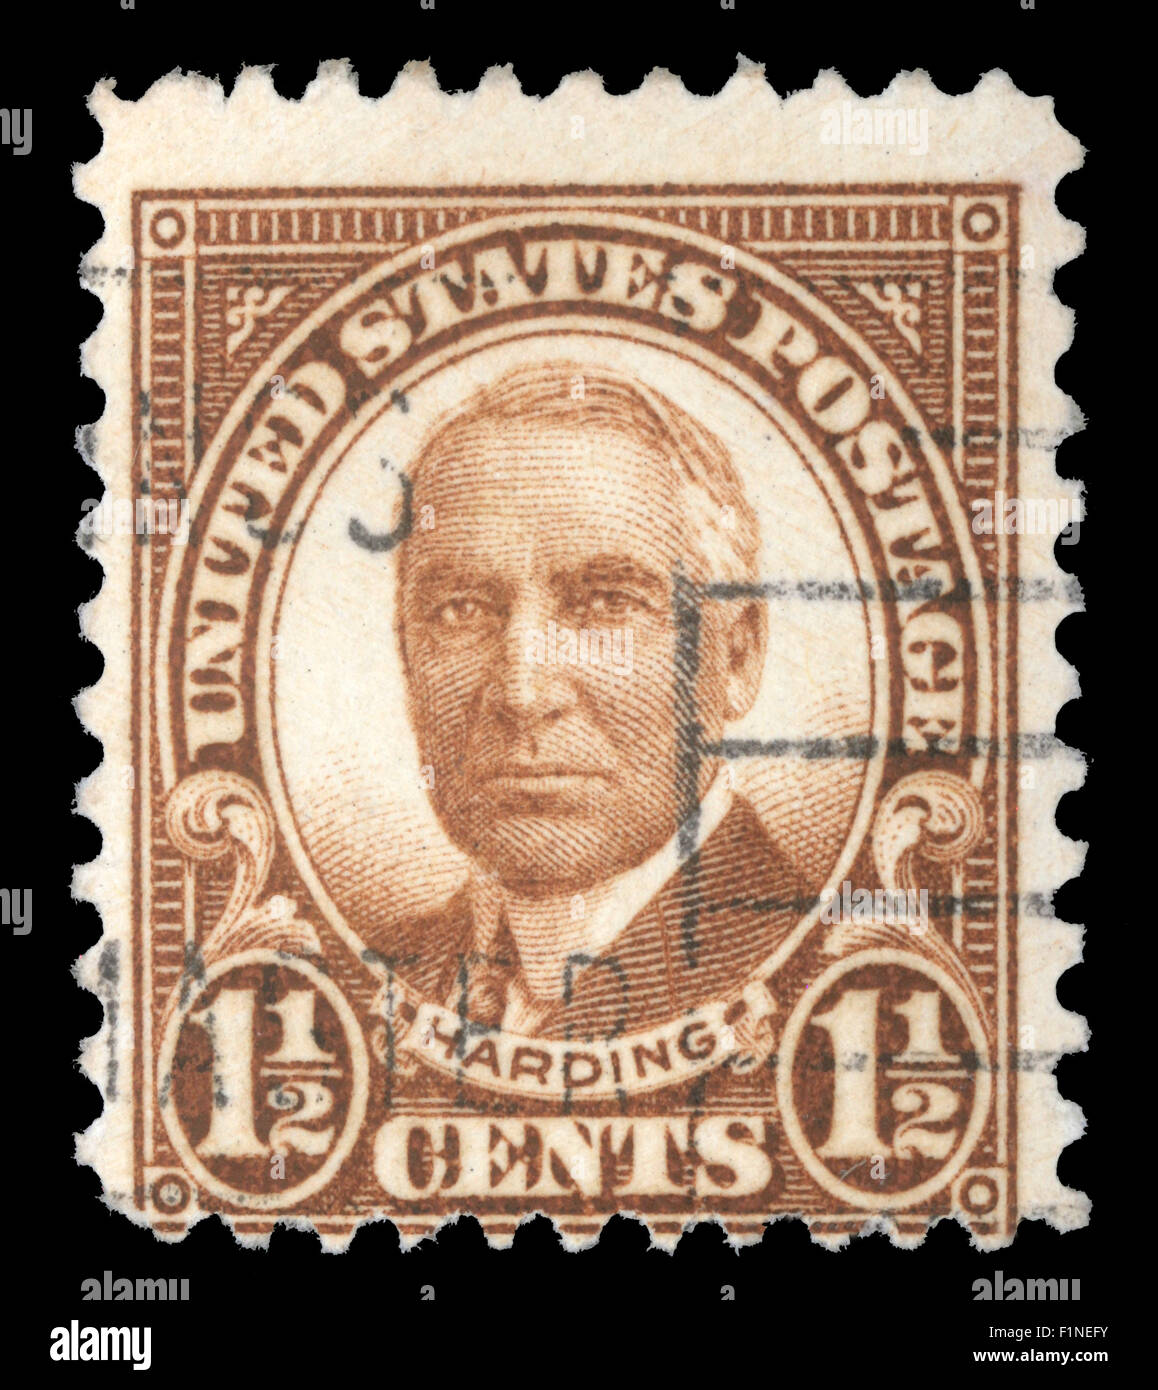 Stamp printed in United States. Displays the image of President Harding. United States - circa 1930-1931 Stock Photo